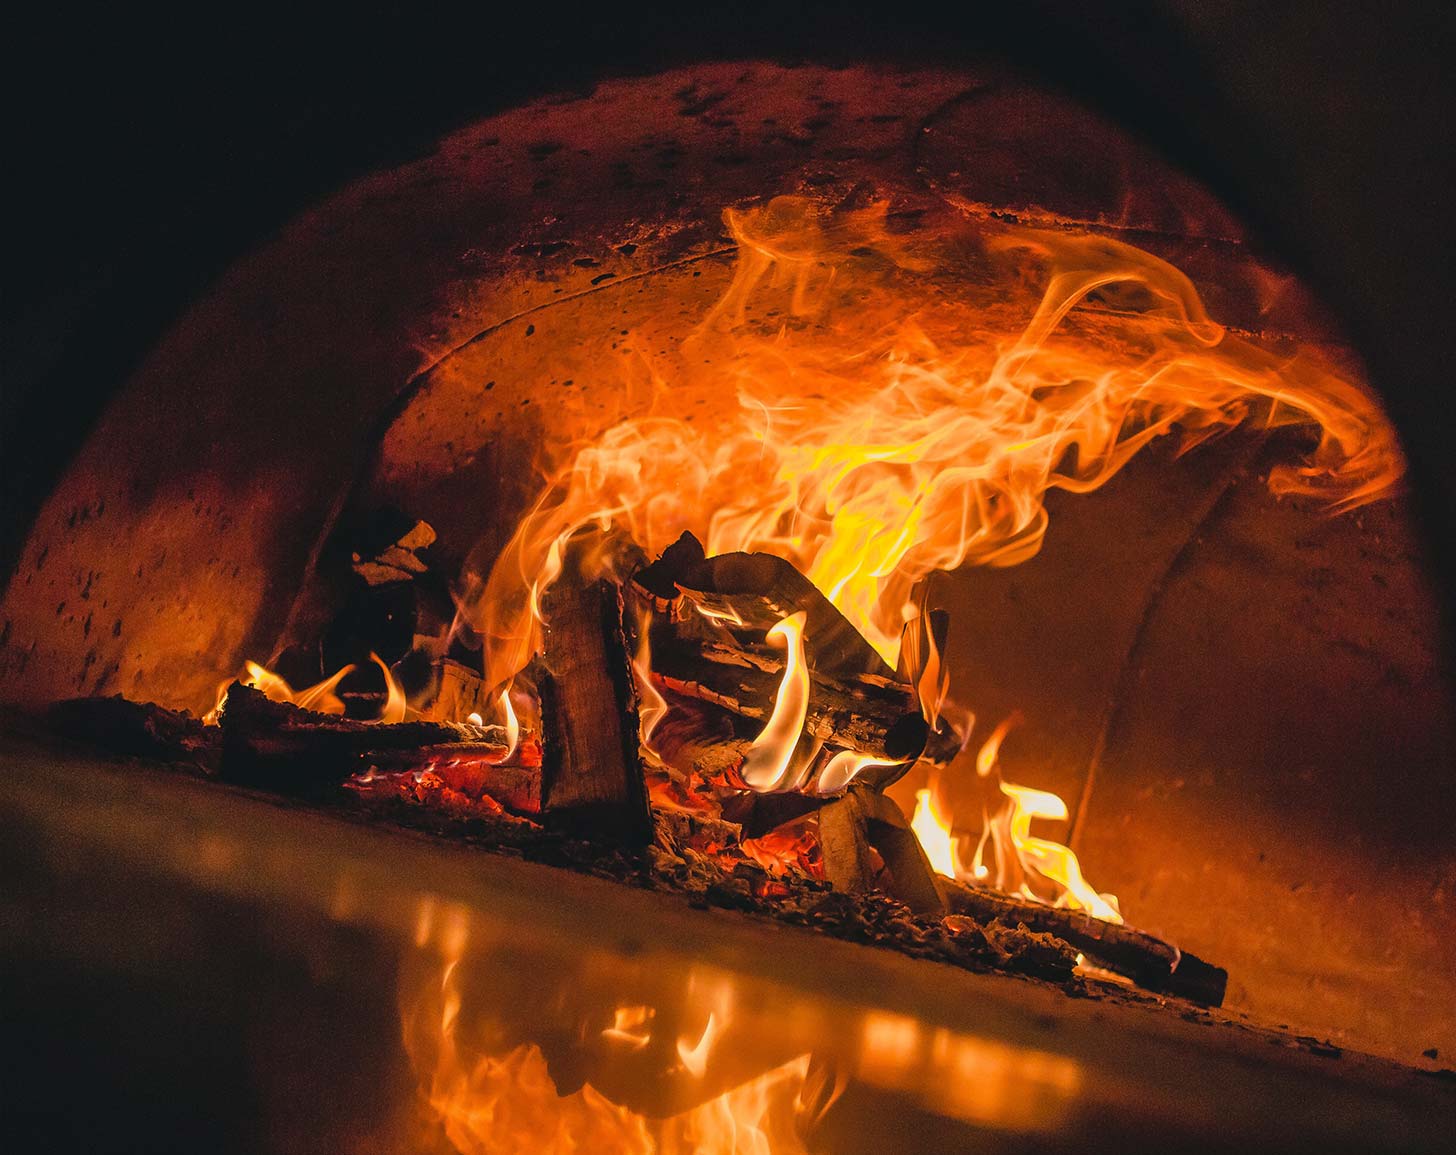 Pizza oven flames